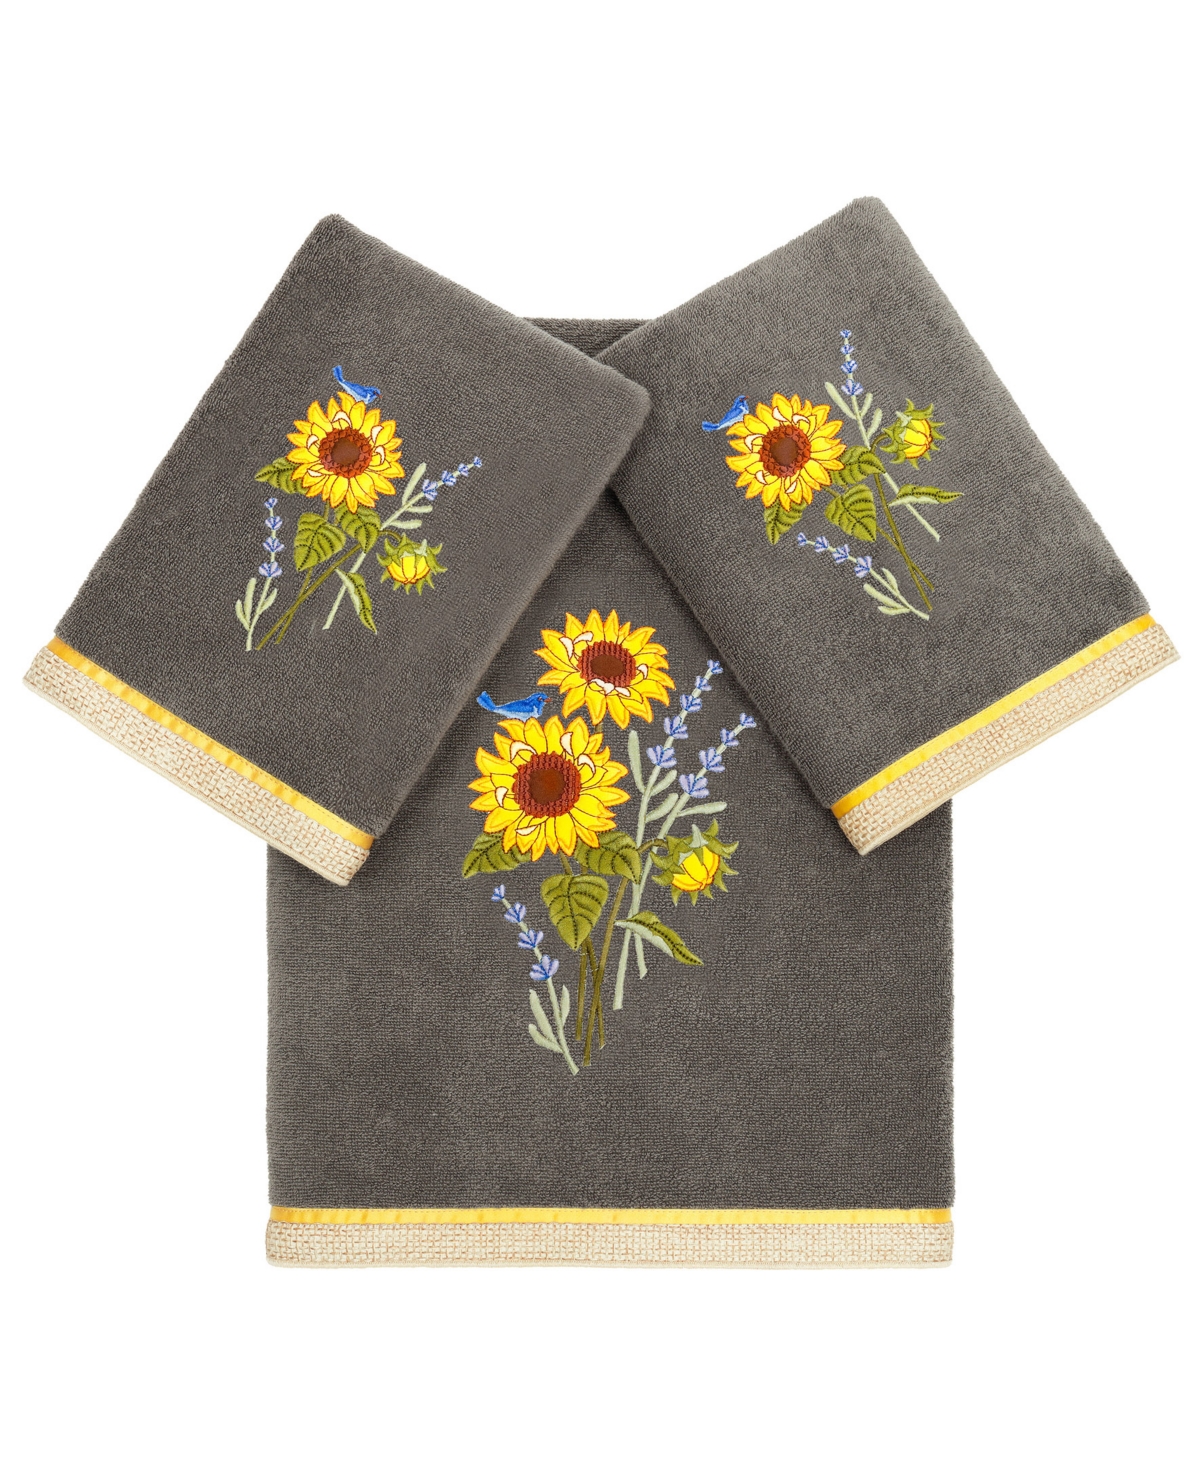 Linum Home Textiles Turkish Cotton Girasol Embellished Towel Set, 3 Piece In Charcoal